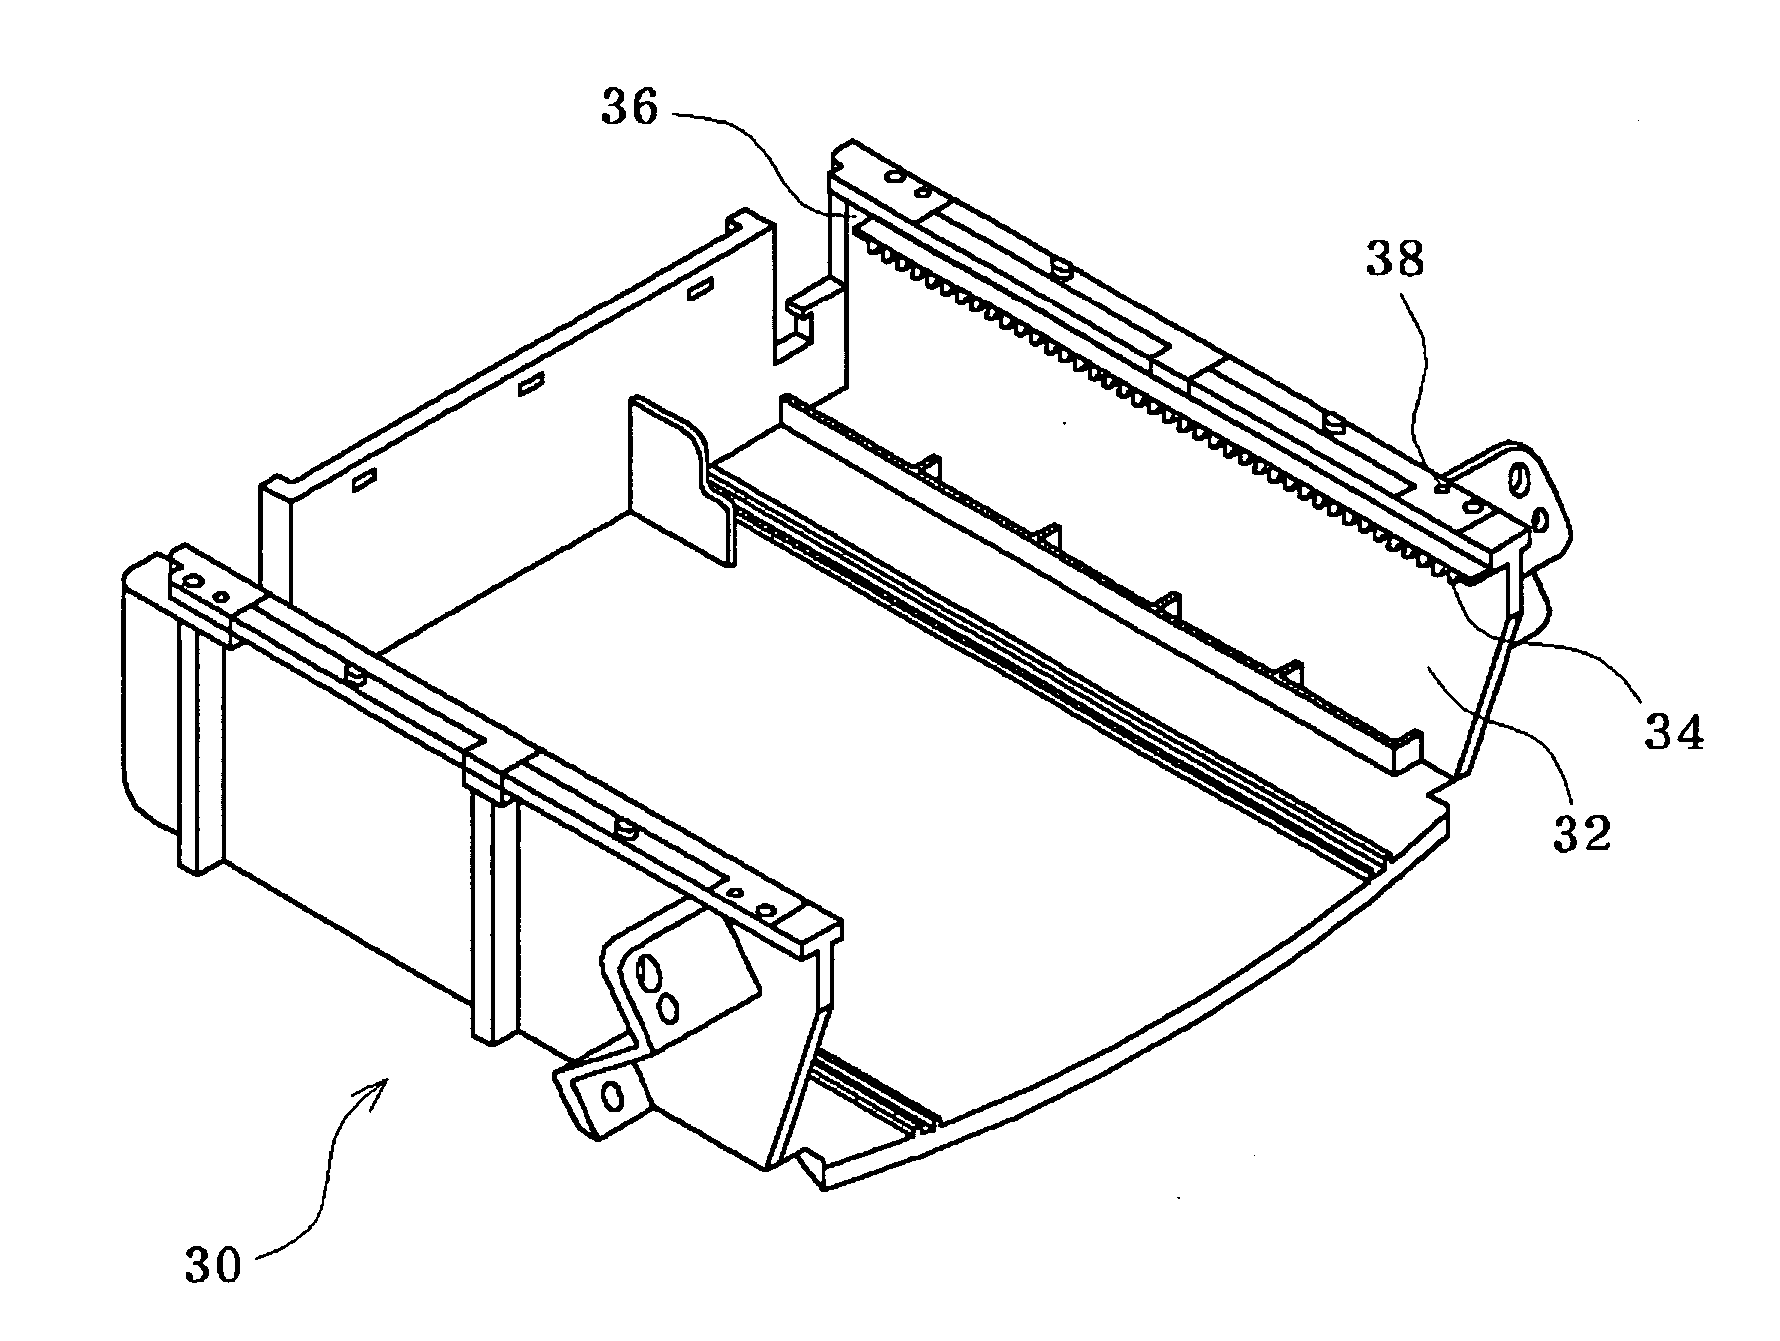 Guide structure for vehicular tray